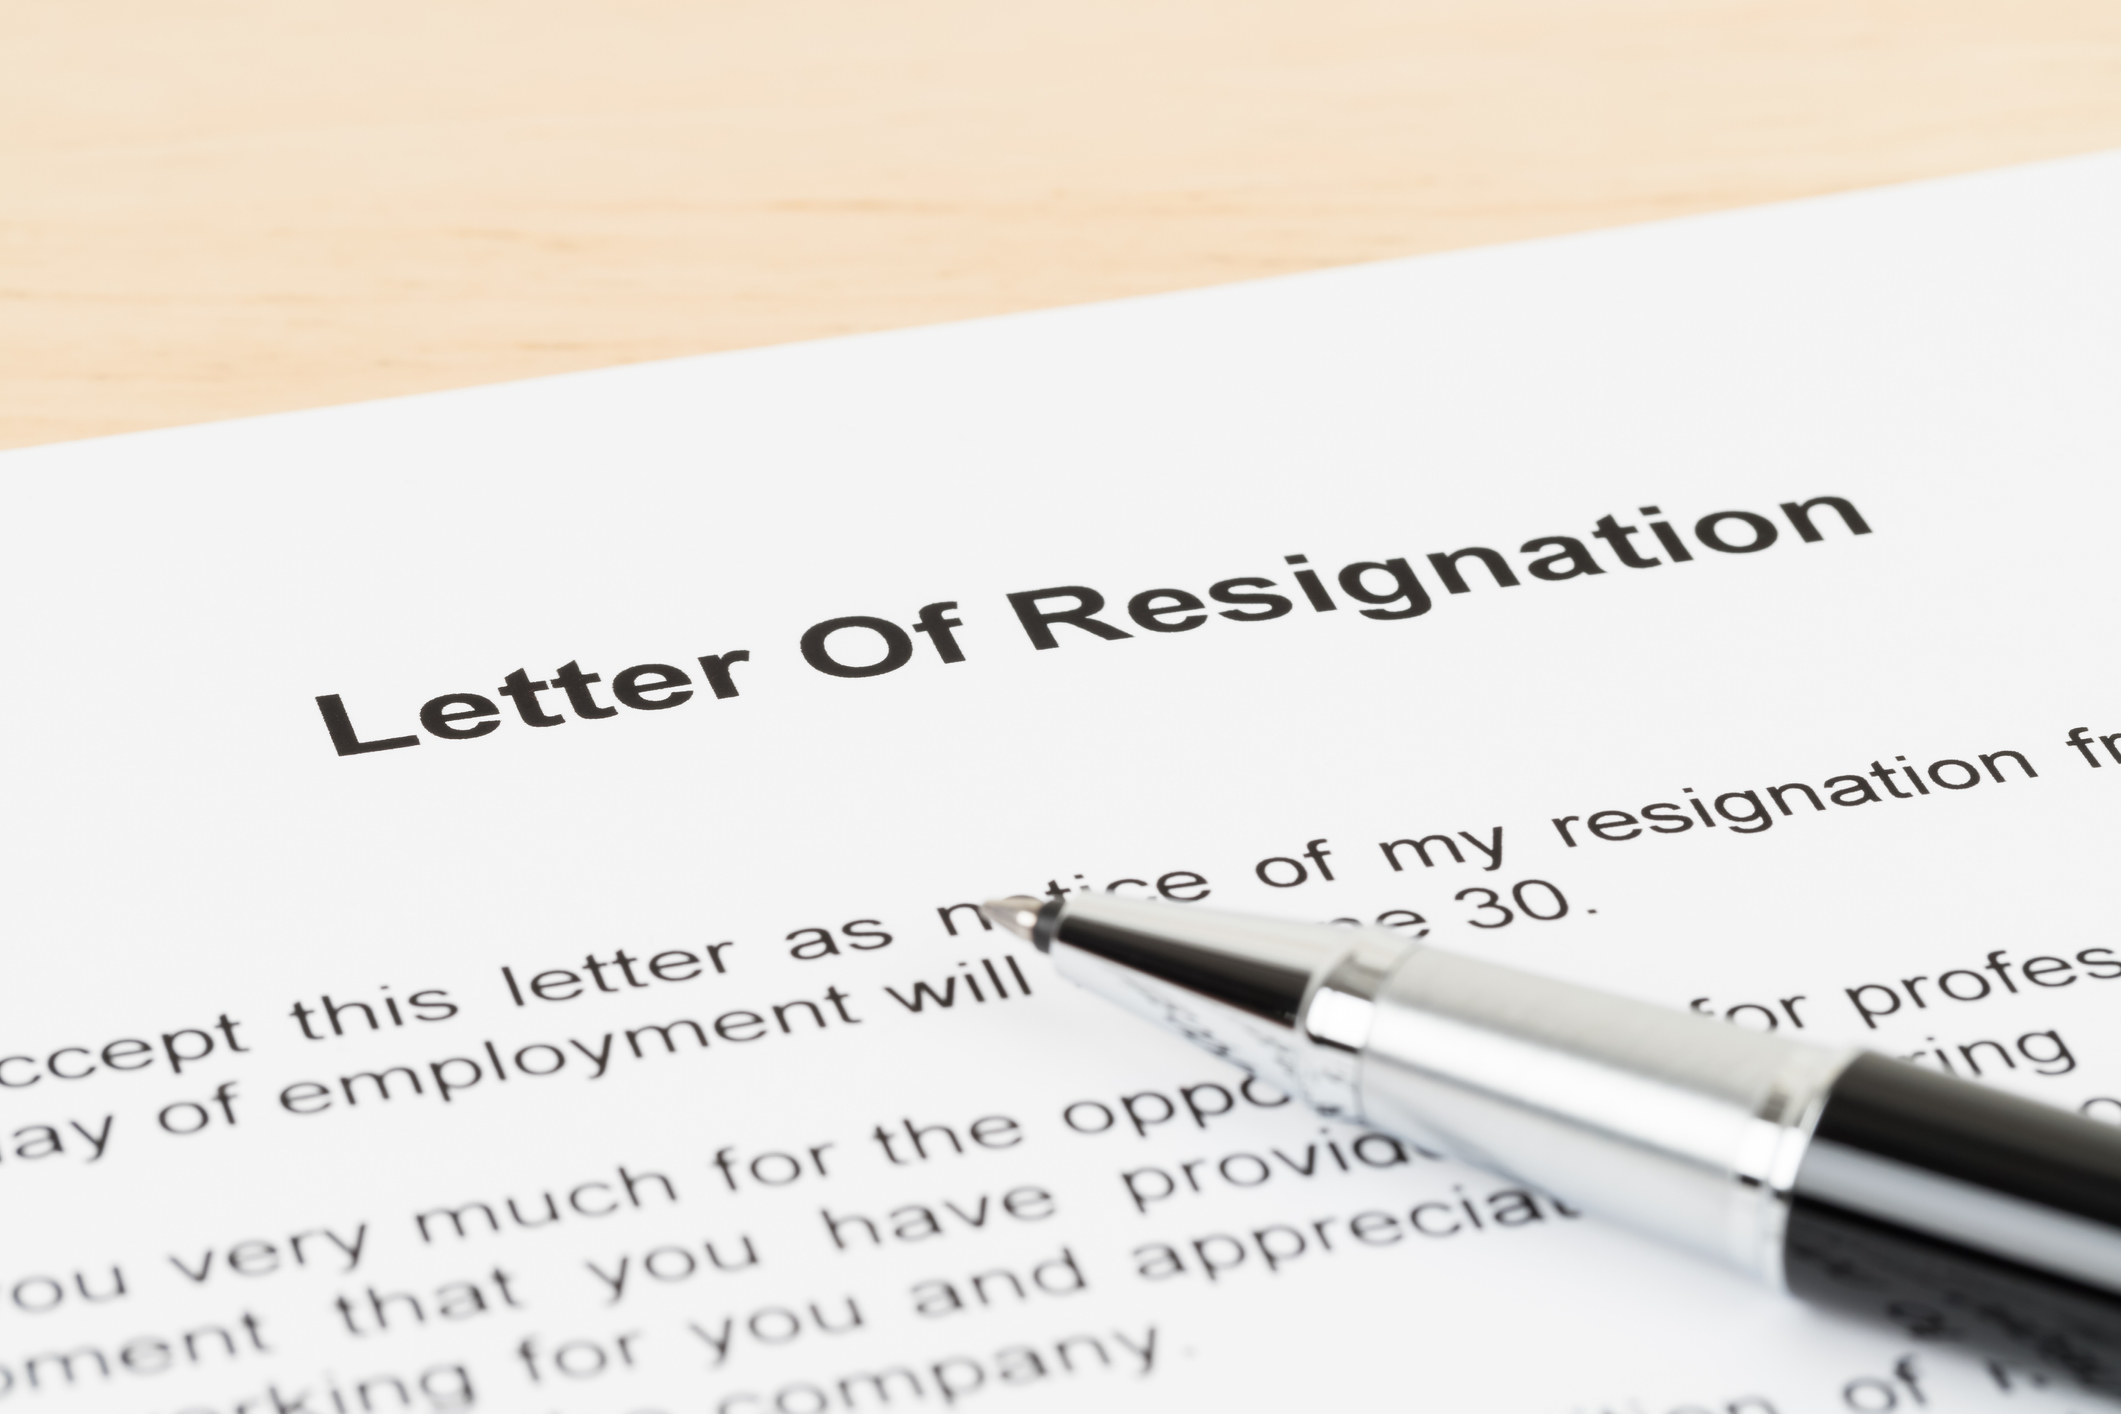 A letter of resignation